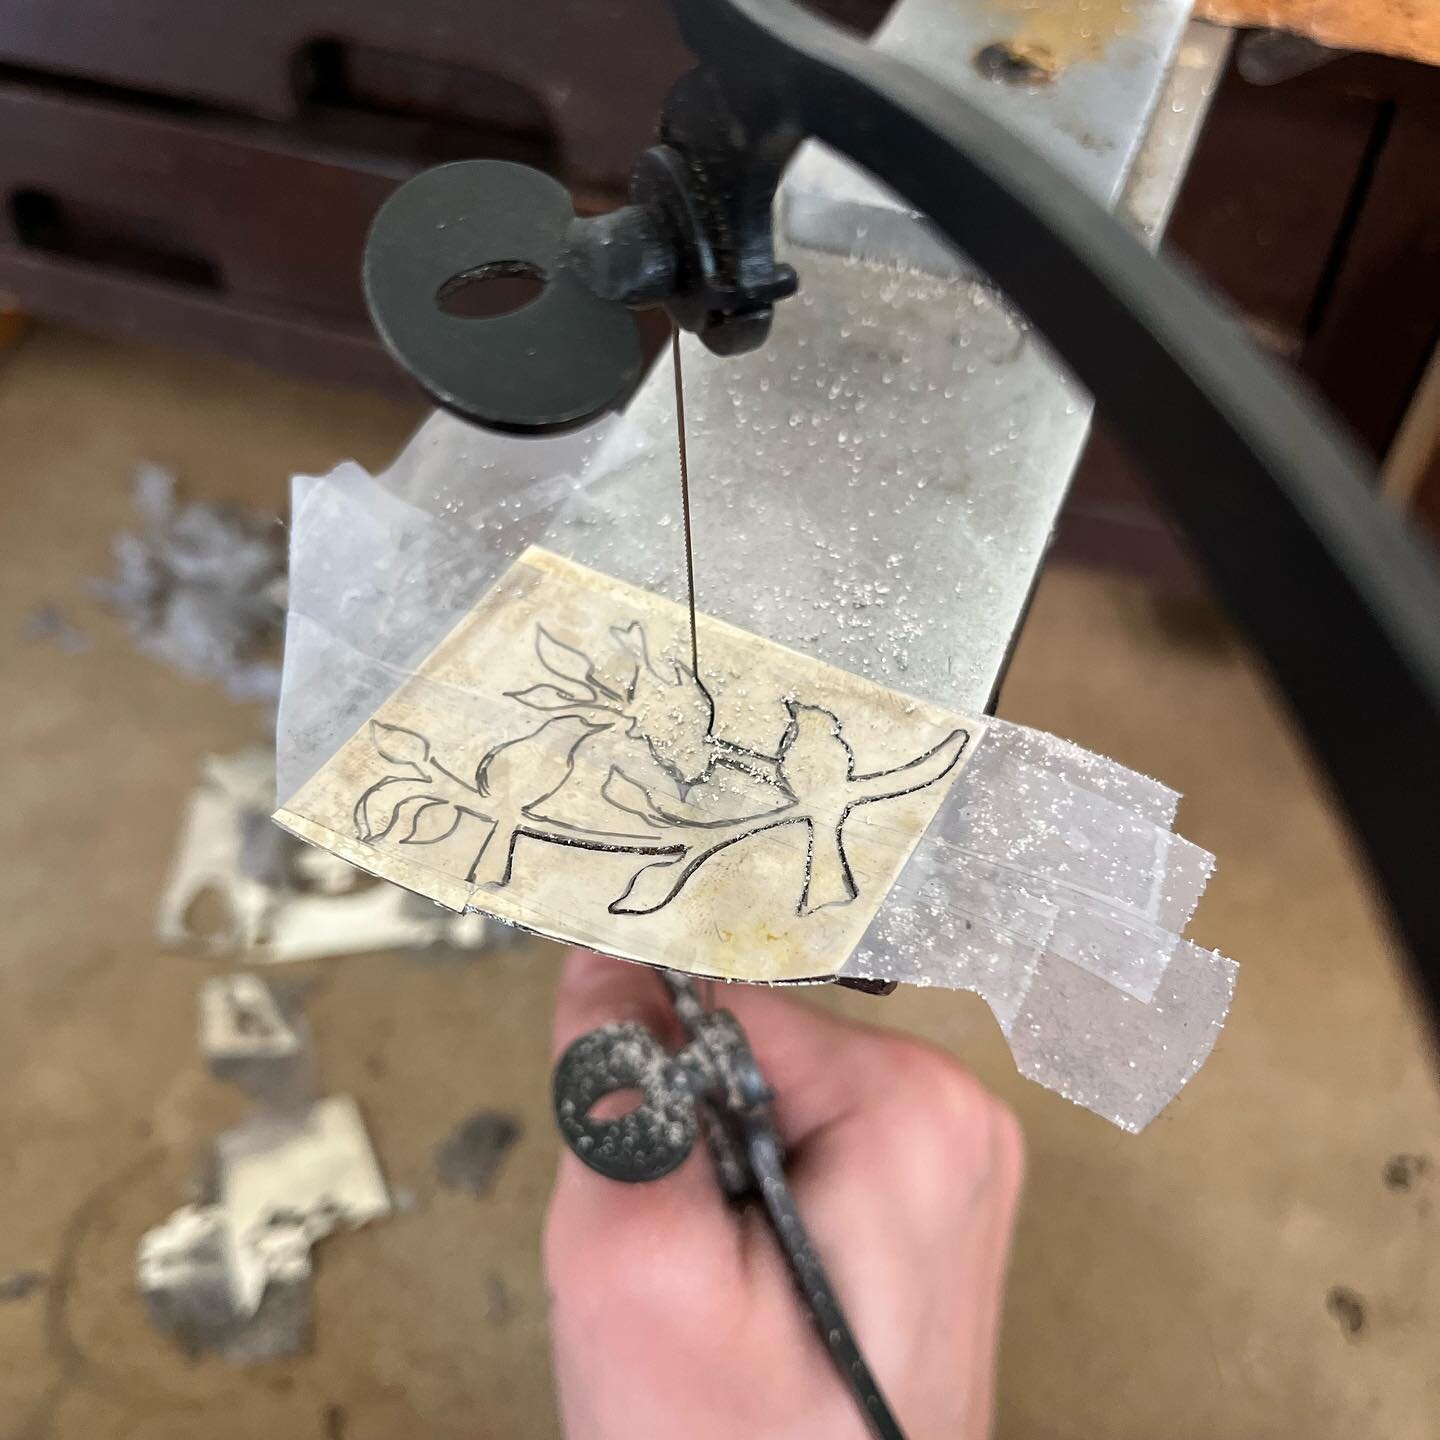 A little behind the scenes look at one of my favorite deigns being made. Swipe to see what this will be soon!

I haven&rsquo;t soldered the bird cut out down yet so I am aware that it is t positioned correctly.